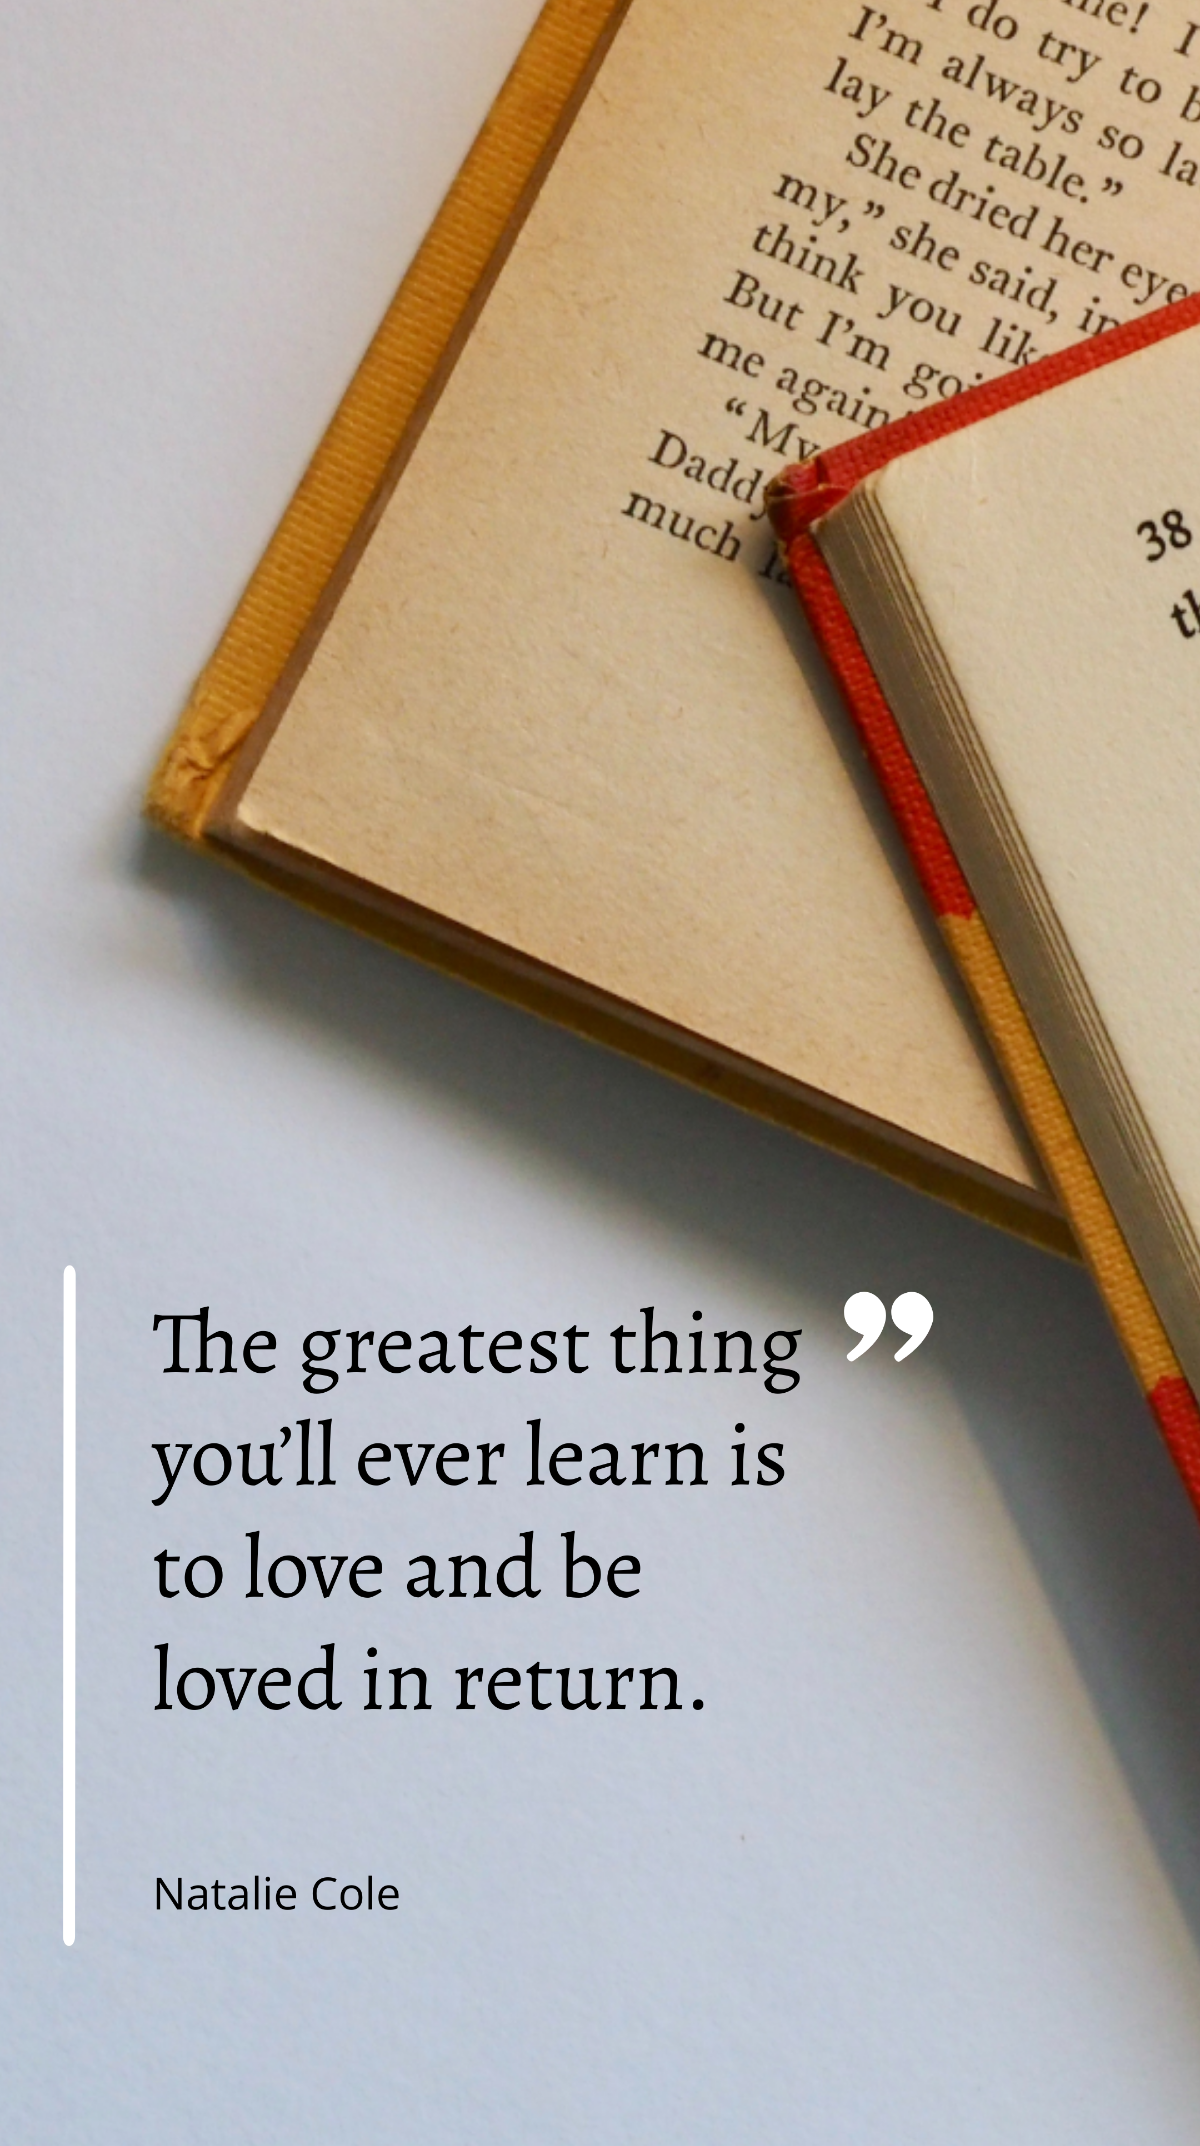 Natalie Cole - “The greatest thing you’ll ever learn is to love and be loved in return.” Template